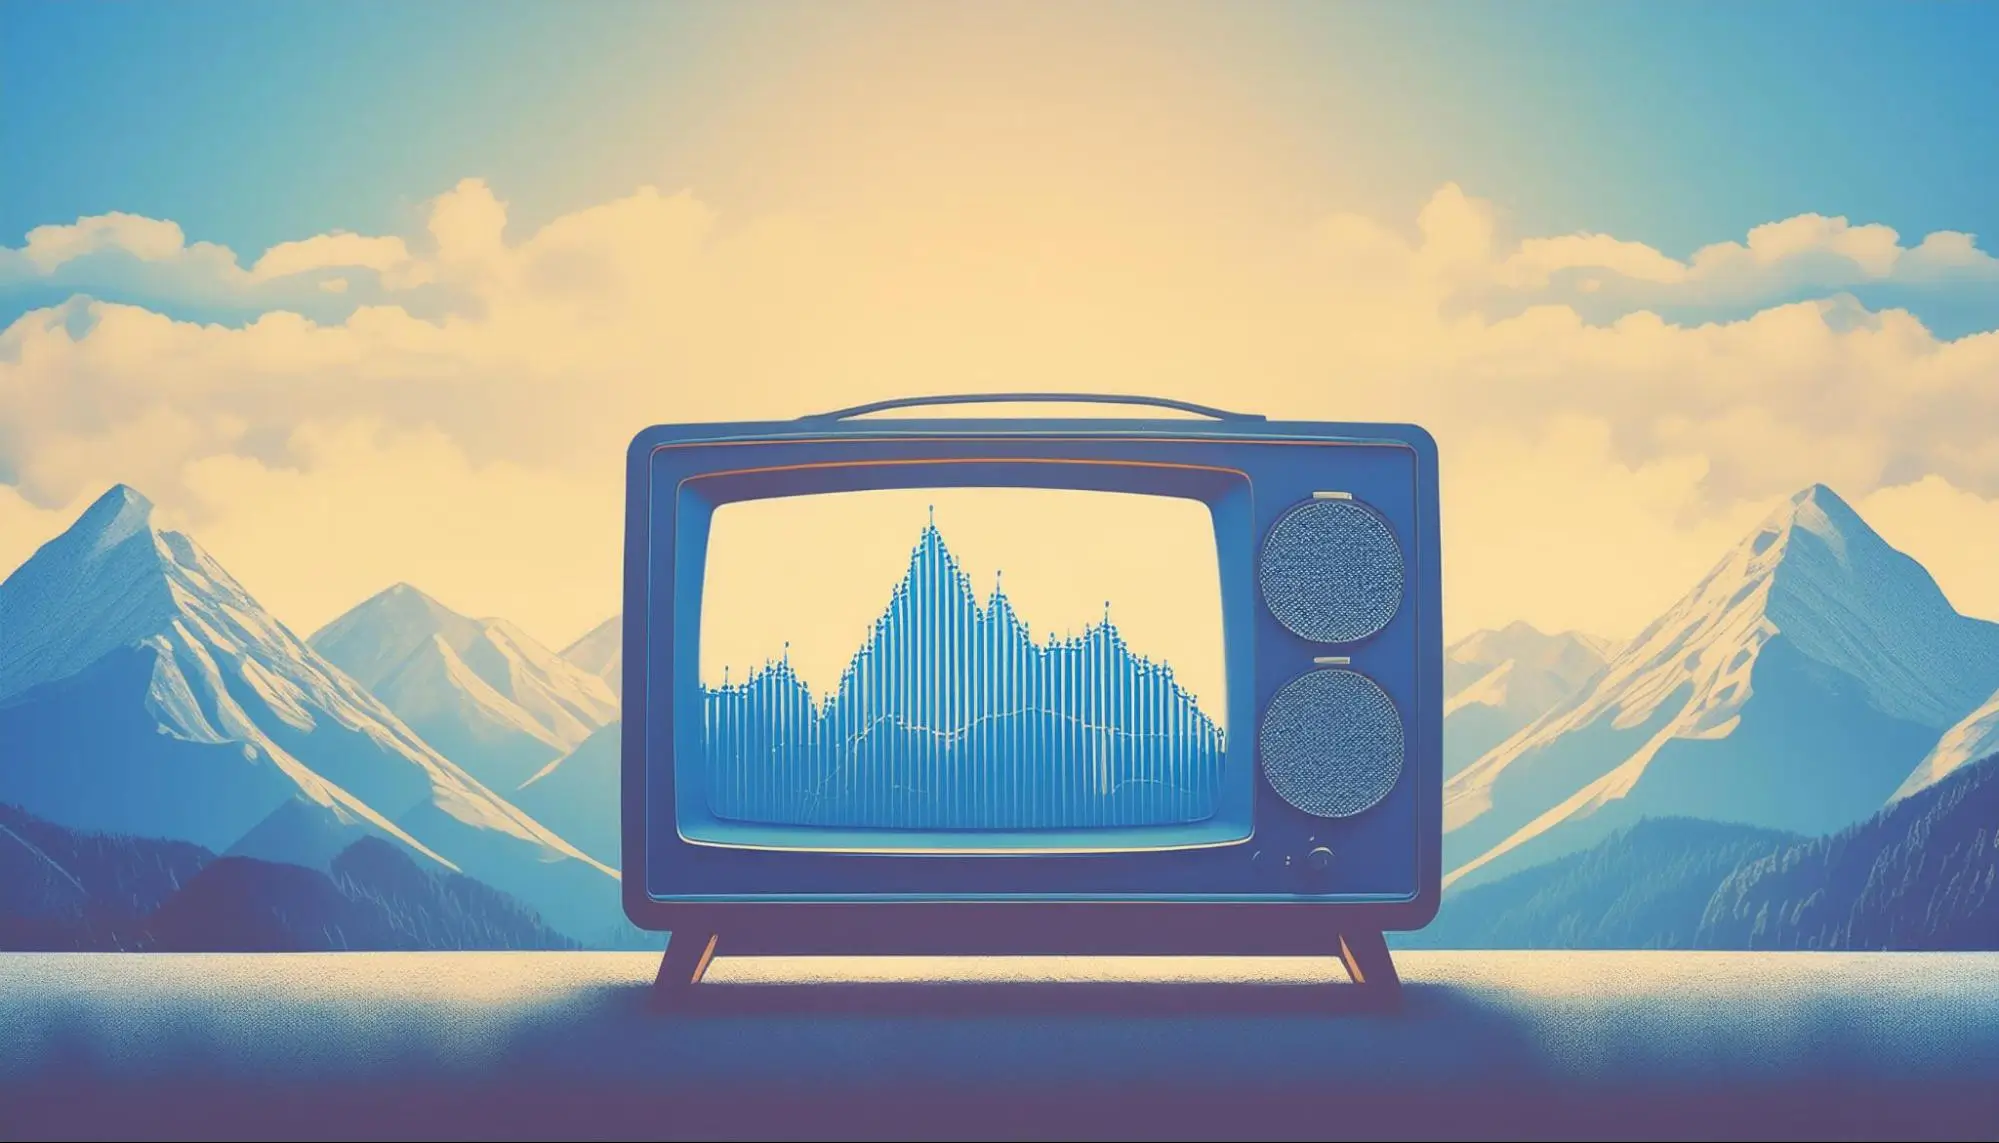 A TV showing a mountain chart. There are mountains in the background.